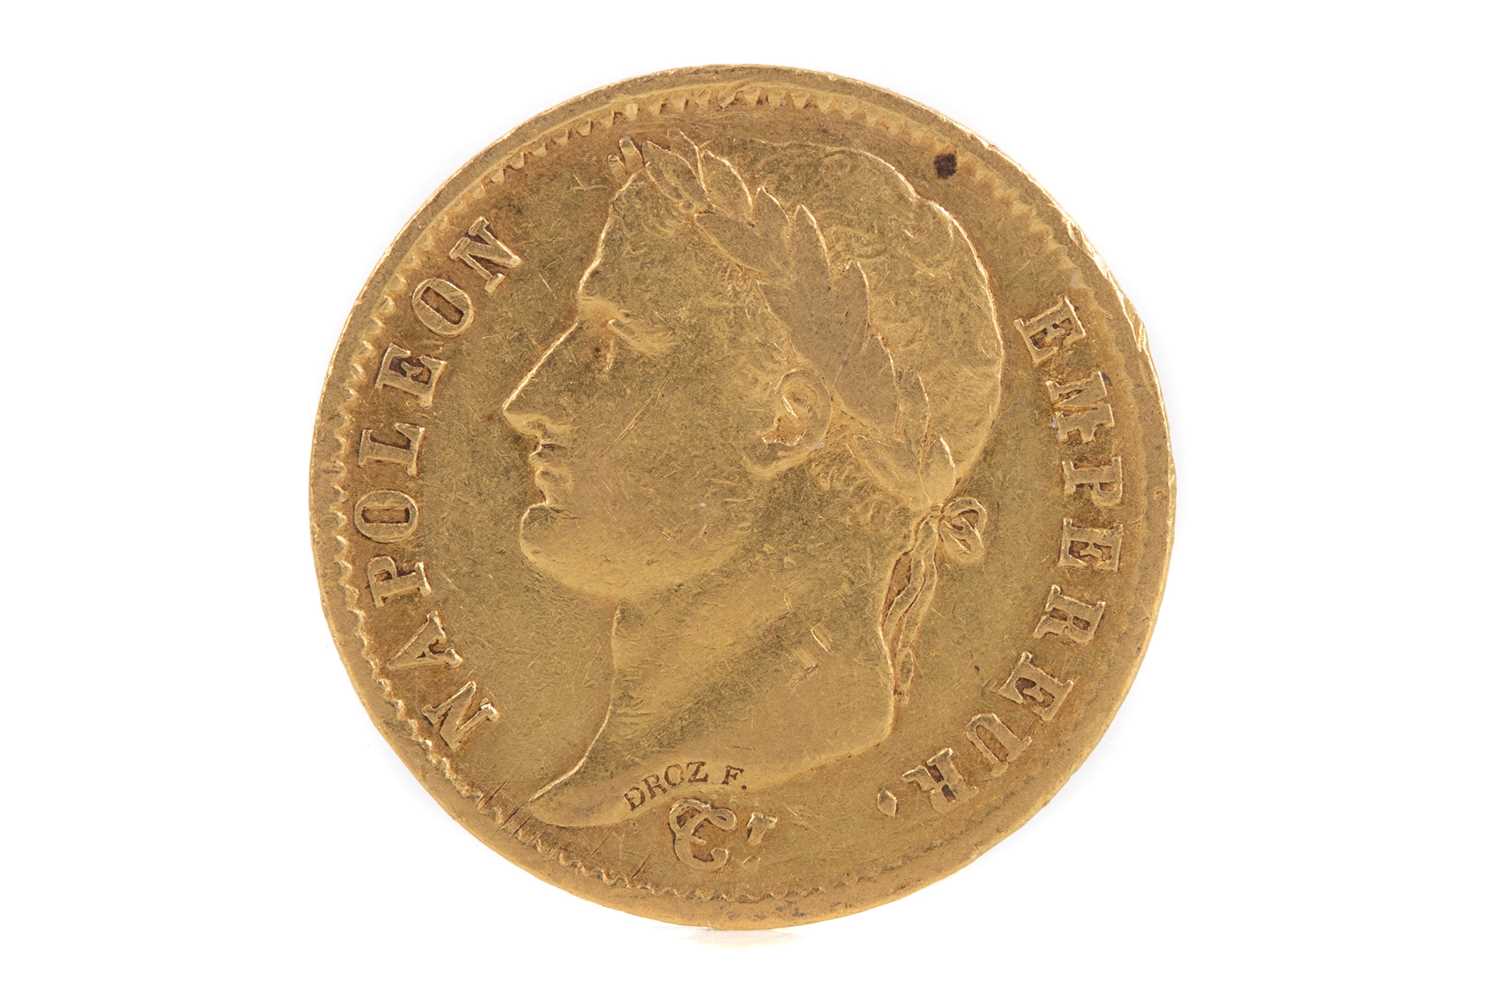 Lot 45 - A FRENCH NAPOLEON GOLD TWENTY FRANCS DATED 1807